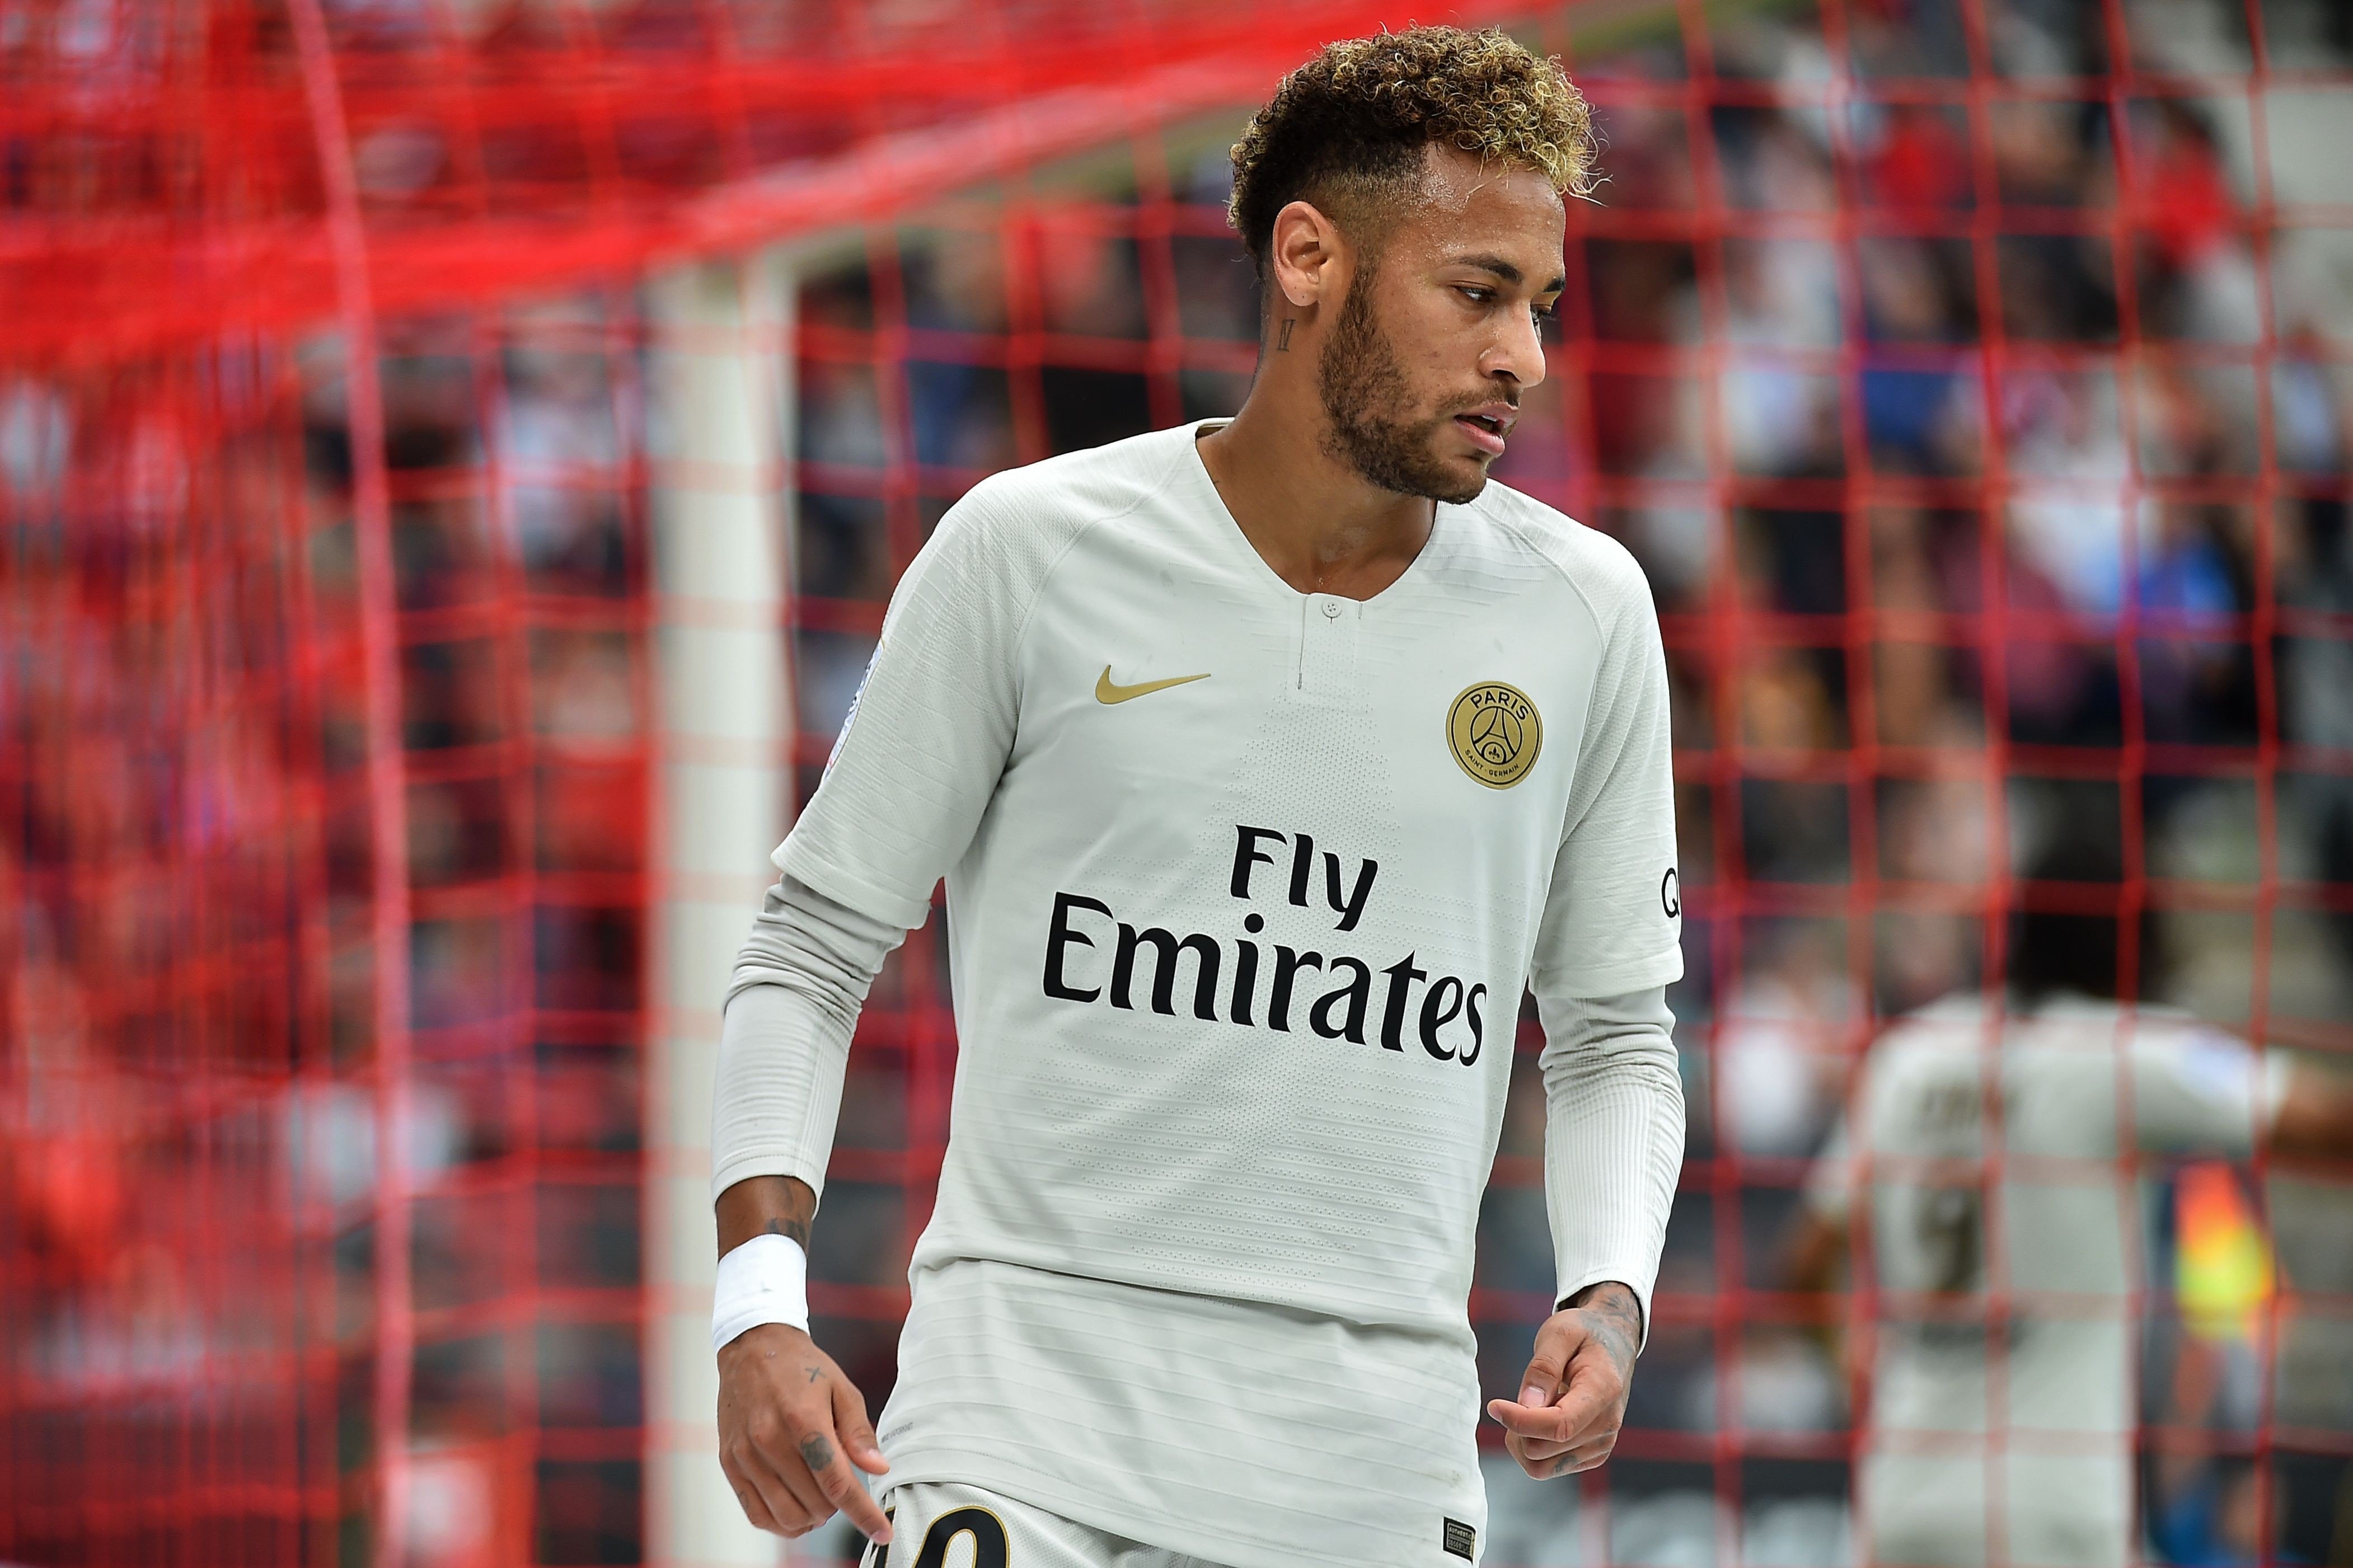 Qatar bankrolled the signing of Neymar, the world’s most expensive footballer, but where the reasons all about football? Photo: AFP